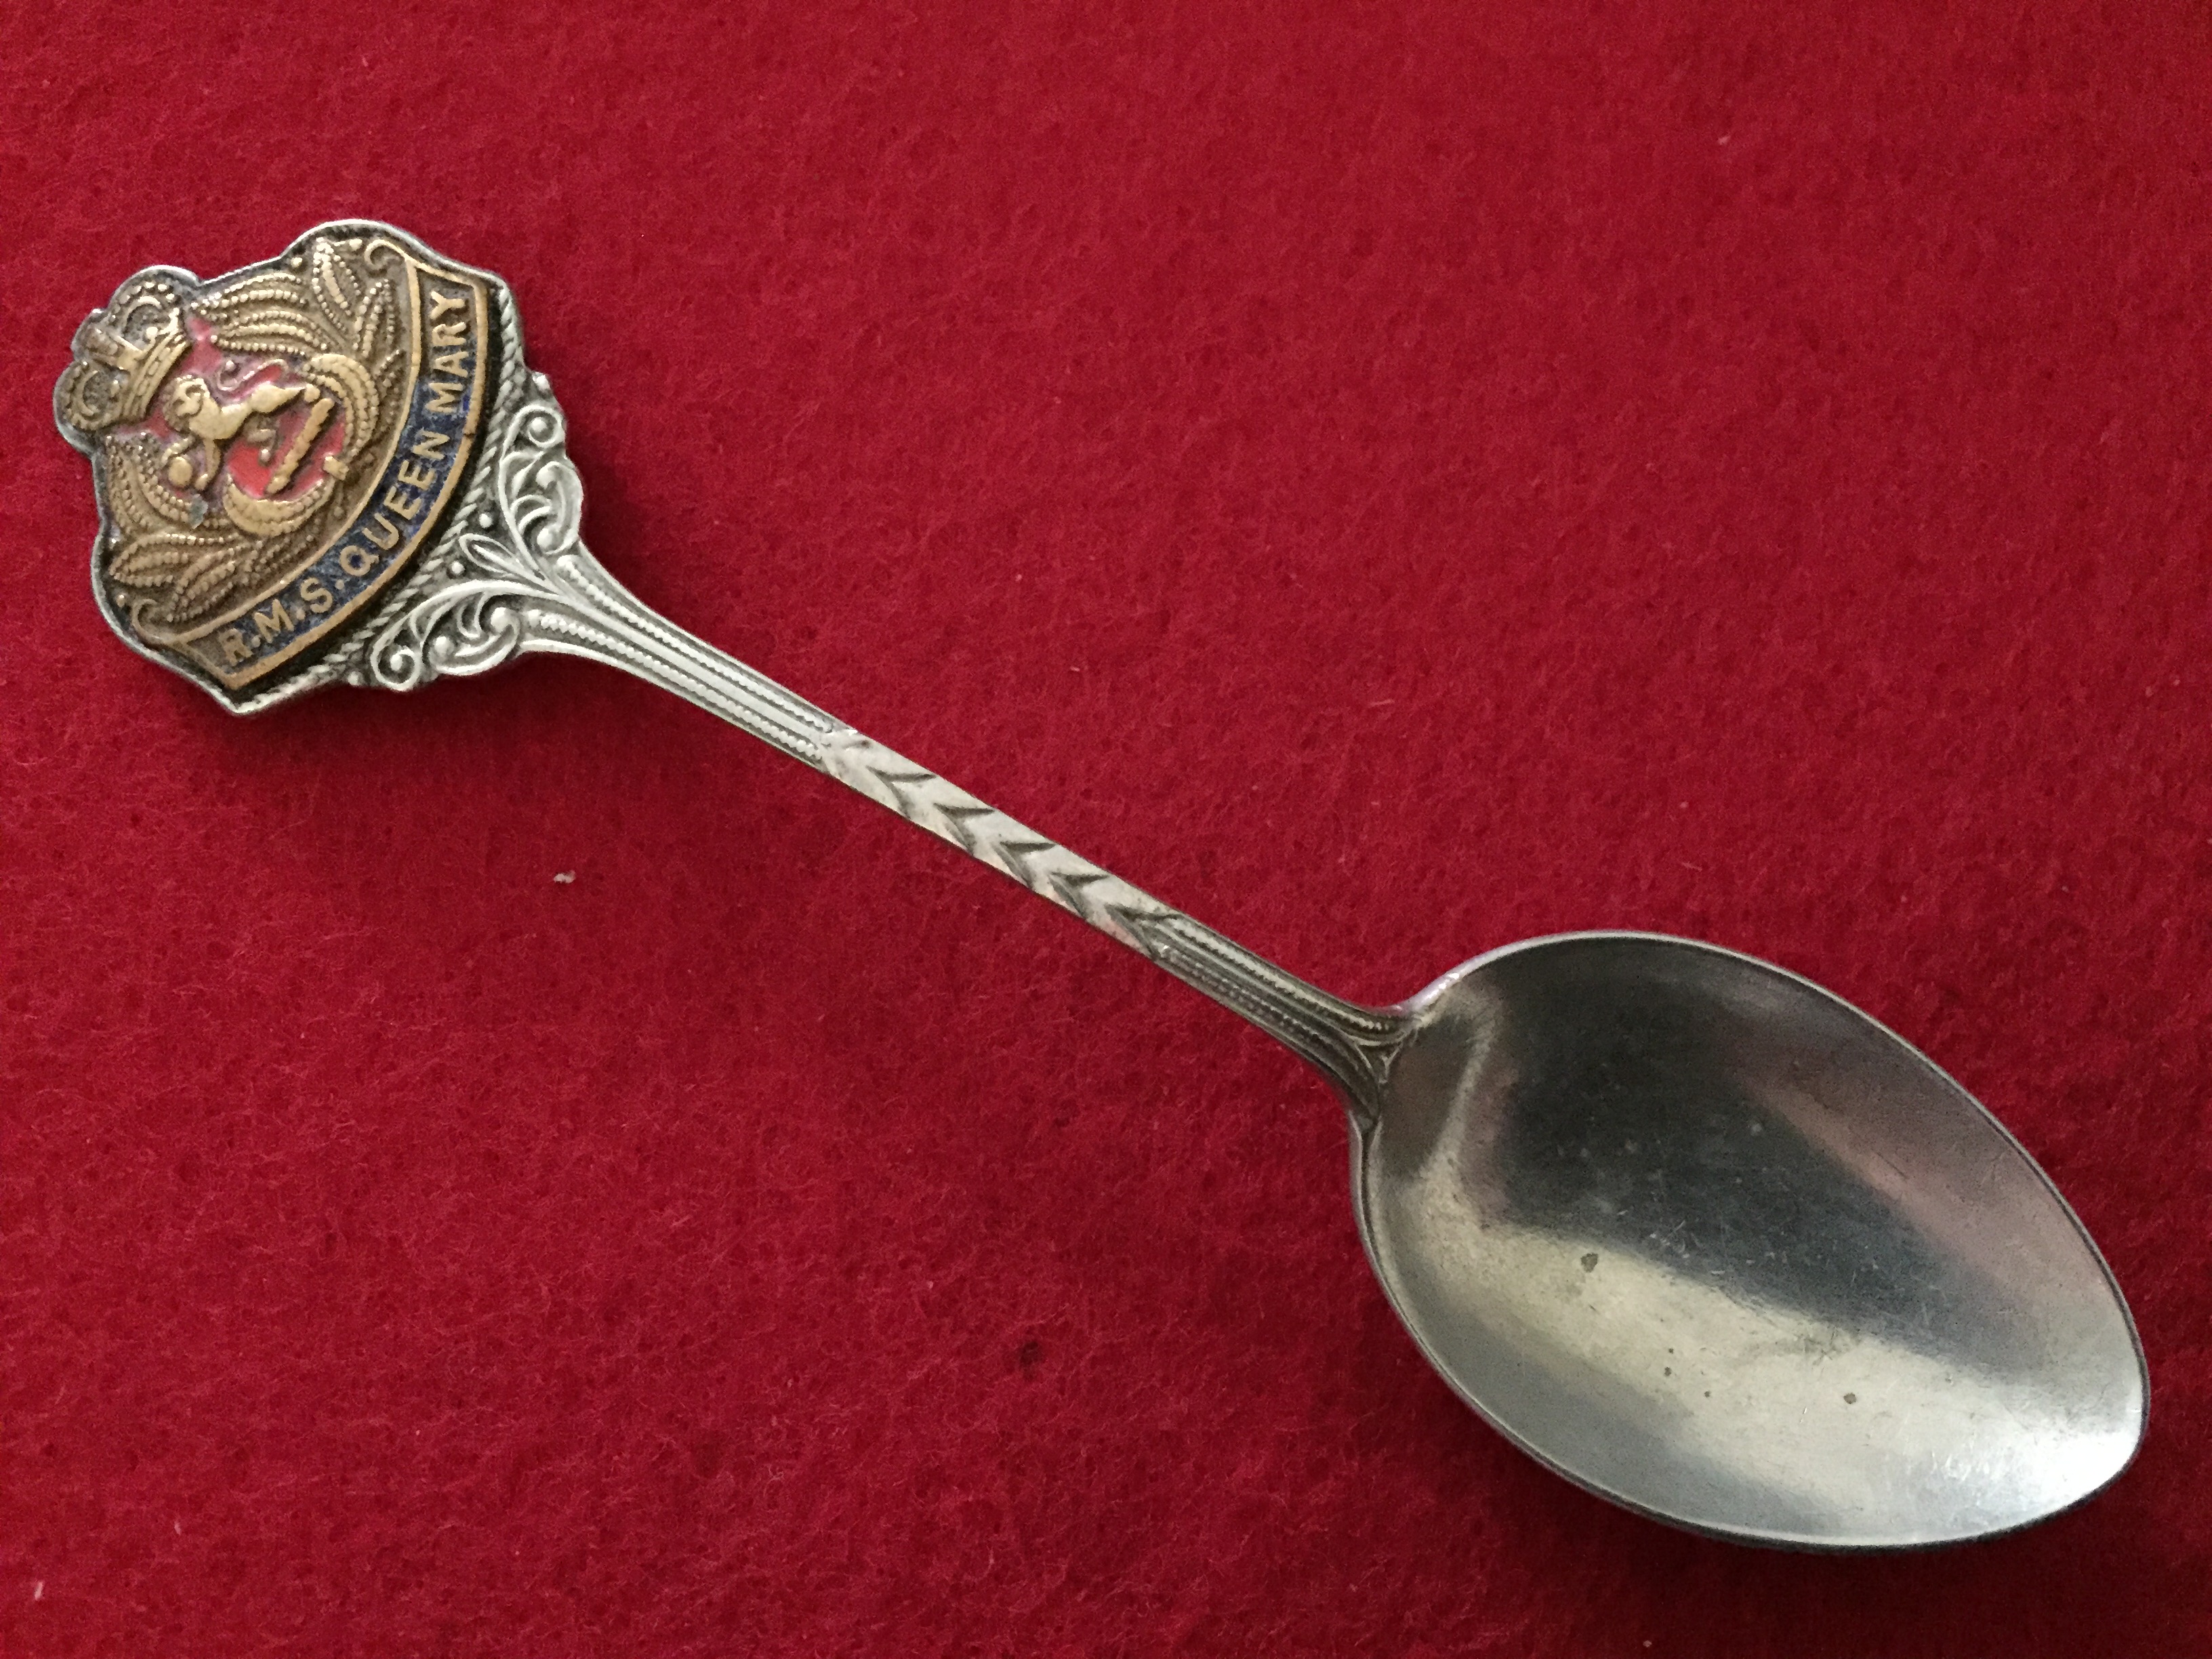 SOUVENIR SPOON FROM THE FAMOUS OLD VESSEL THE RMS QUEEN MARY 